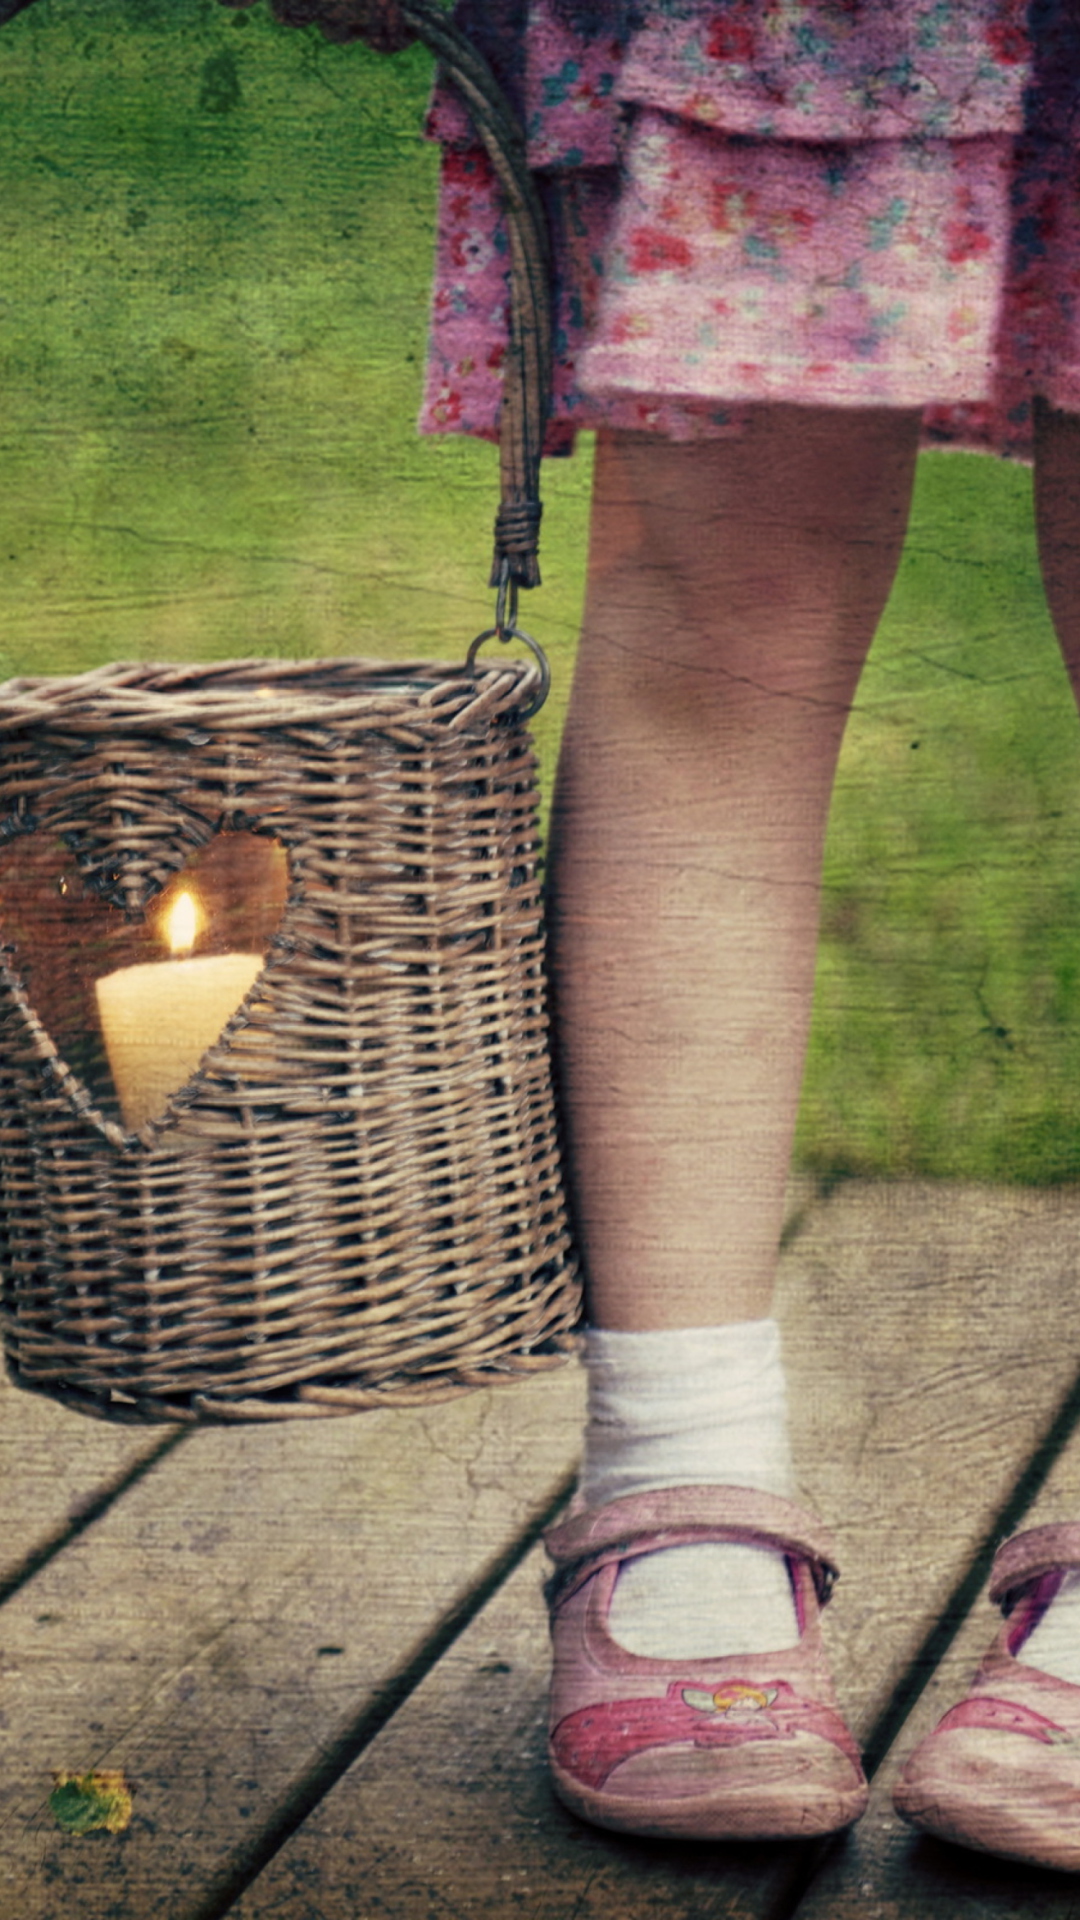 Child With Basket And Candle screenshot #1 1080x1920